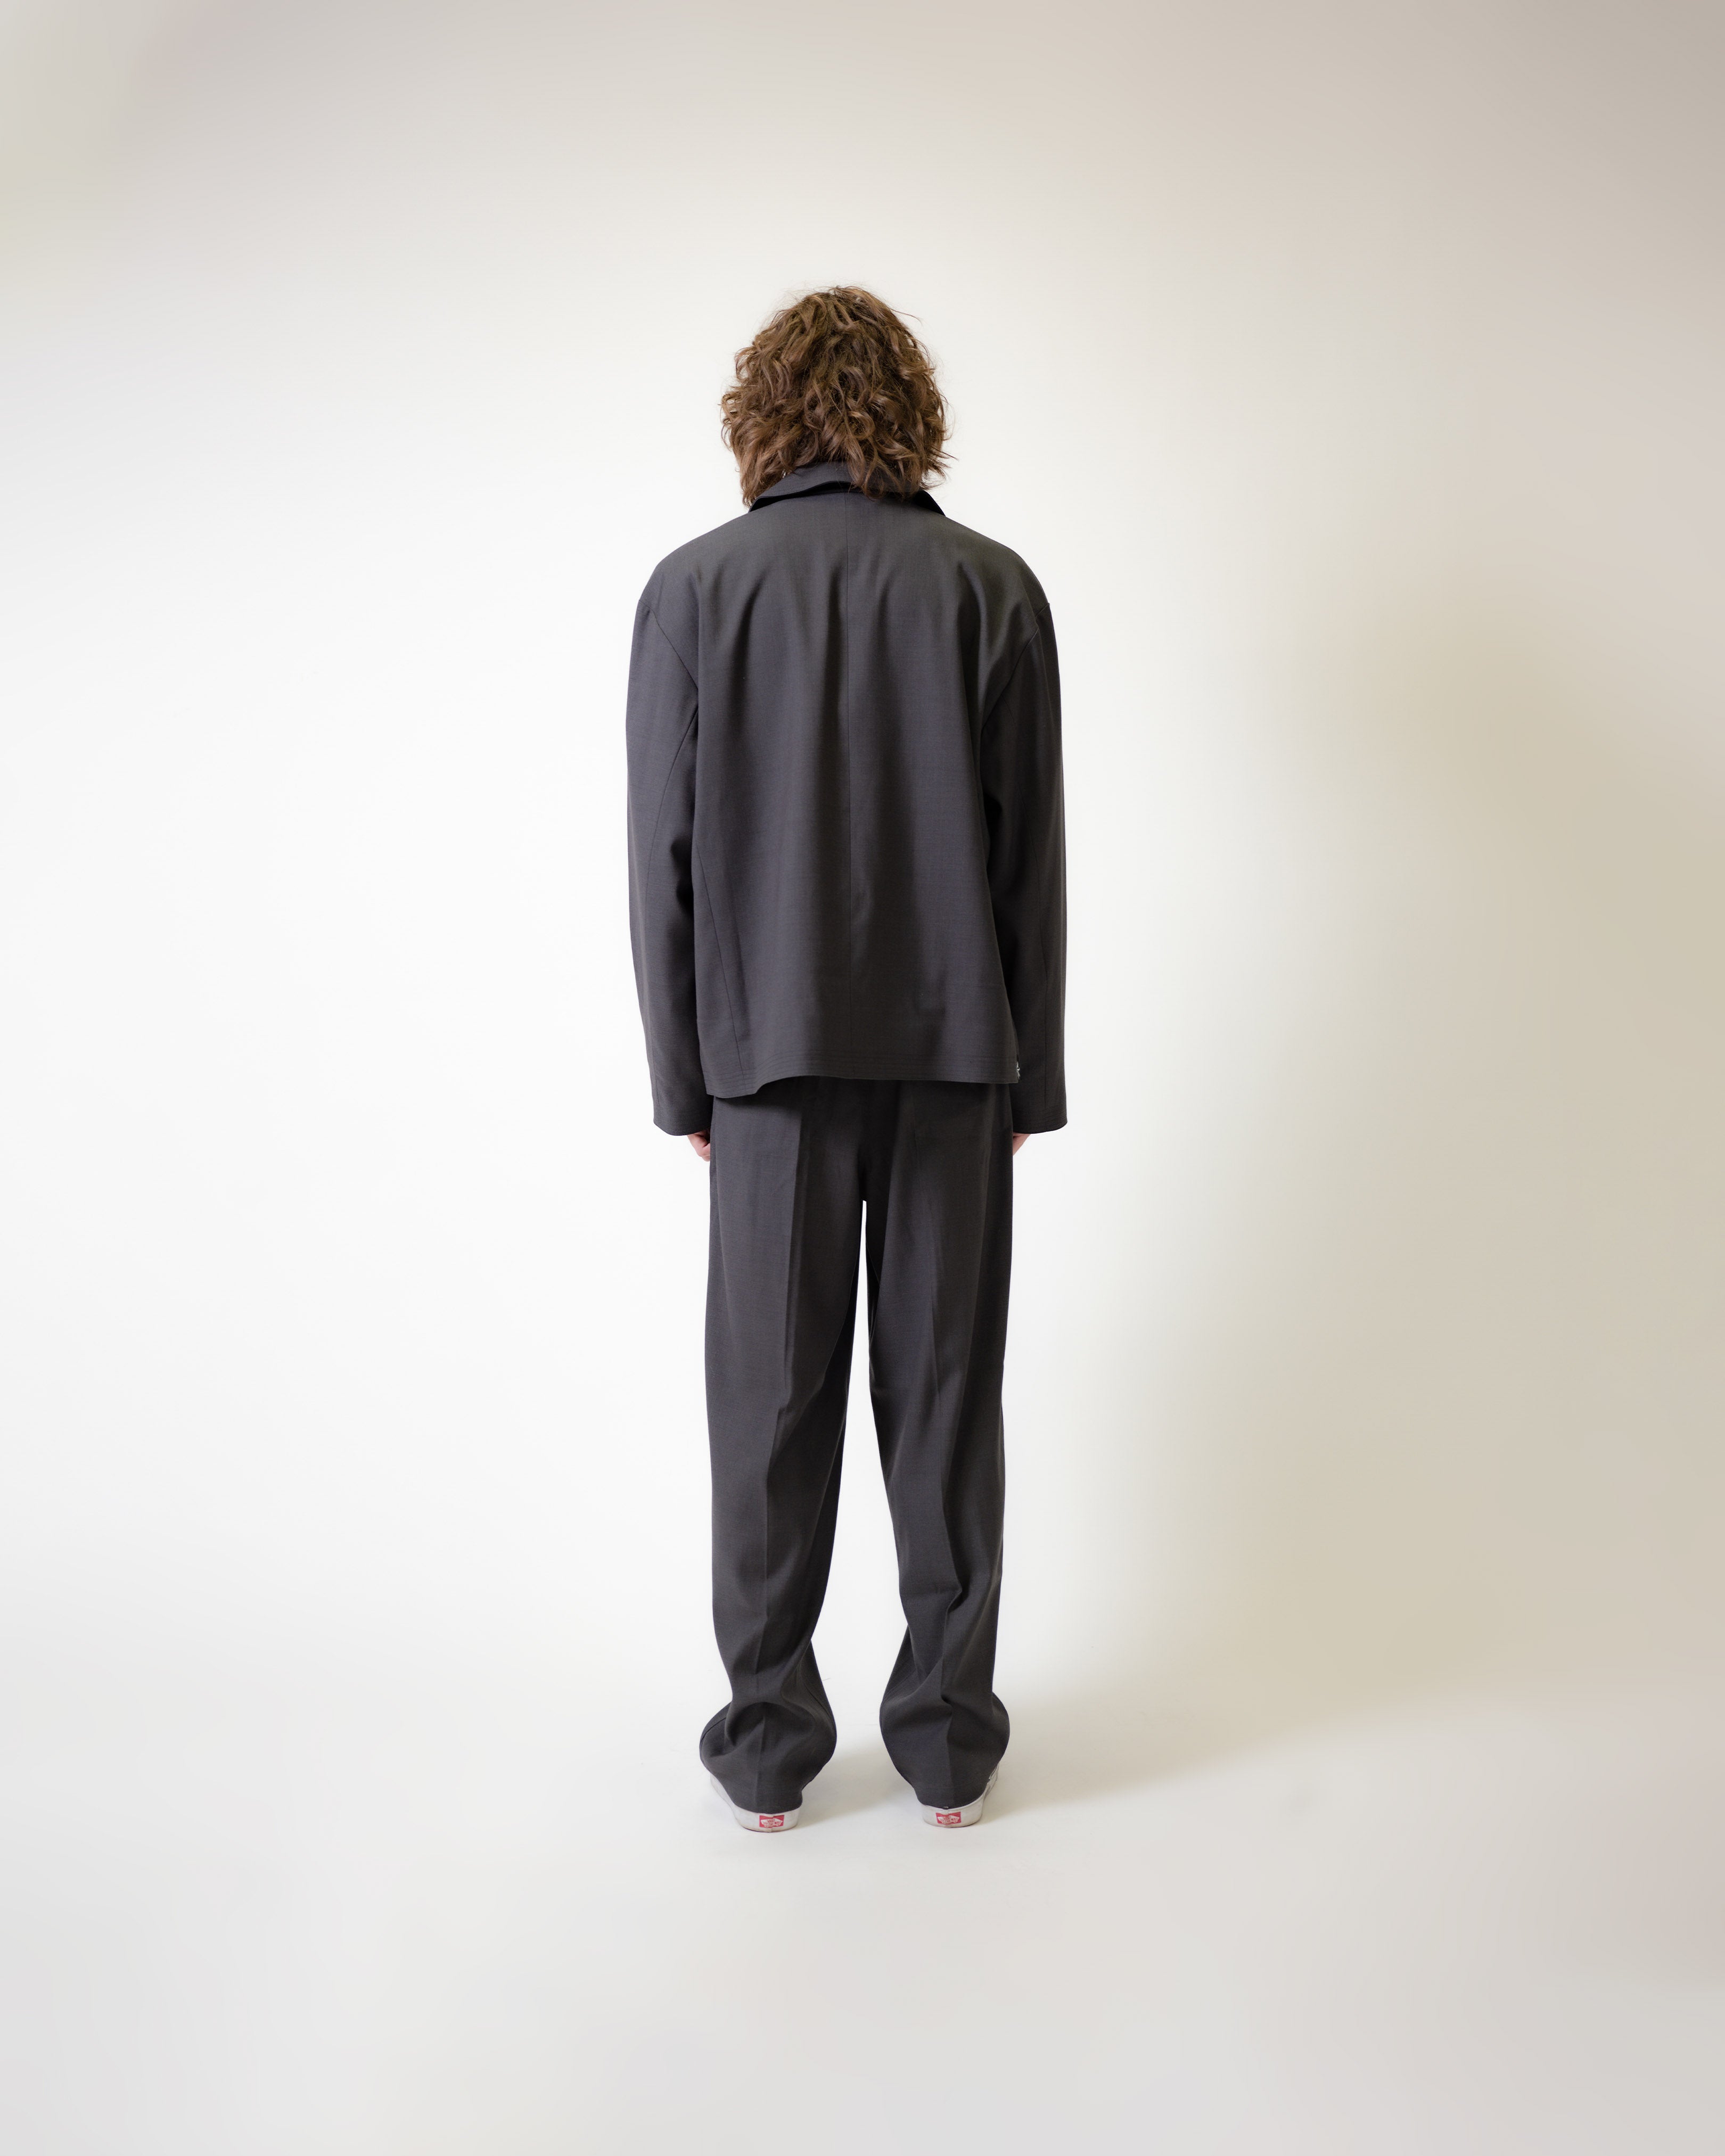 PLEATED SUIT PANT - CHARCOAL